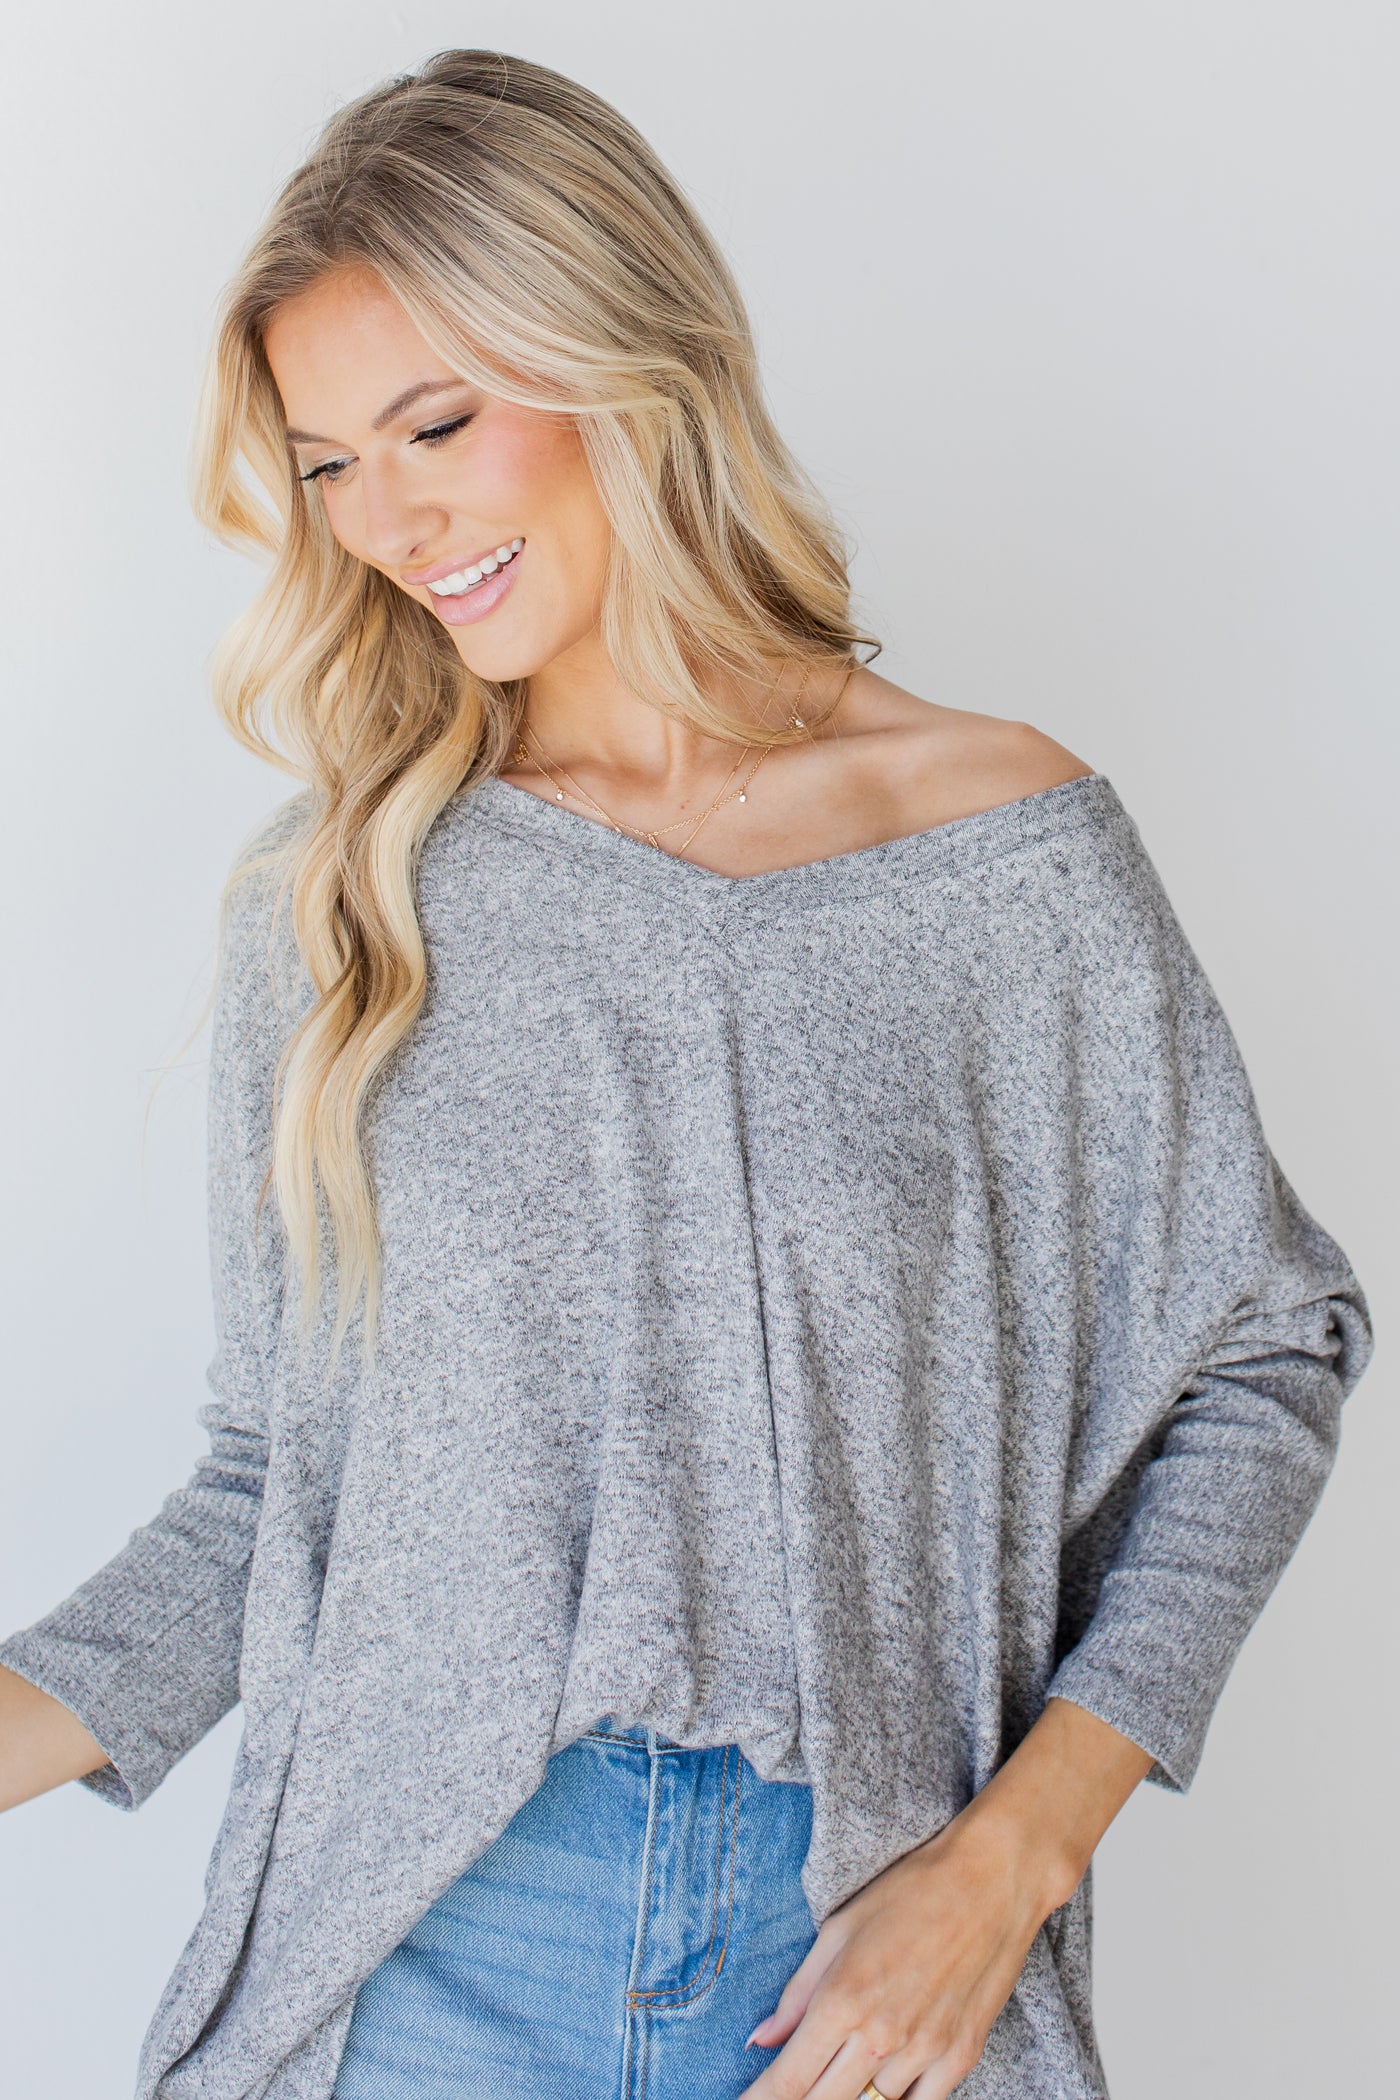 Brushed Knit Top in heather grey front view